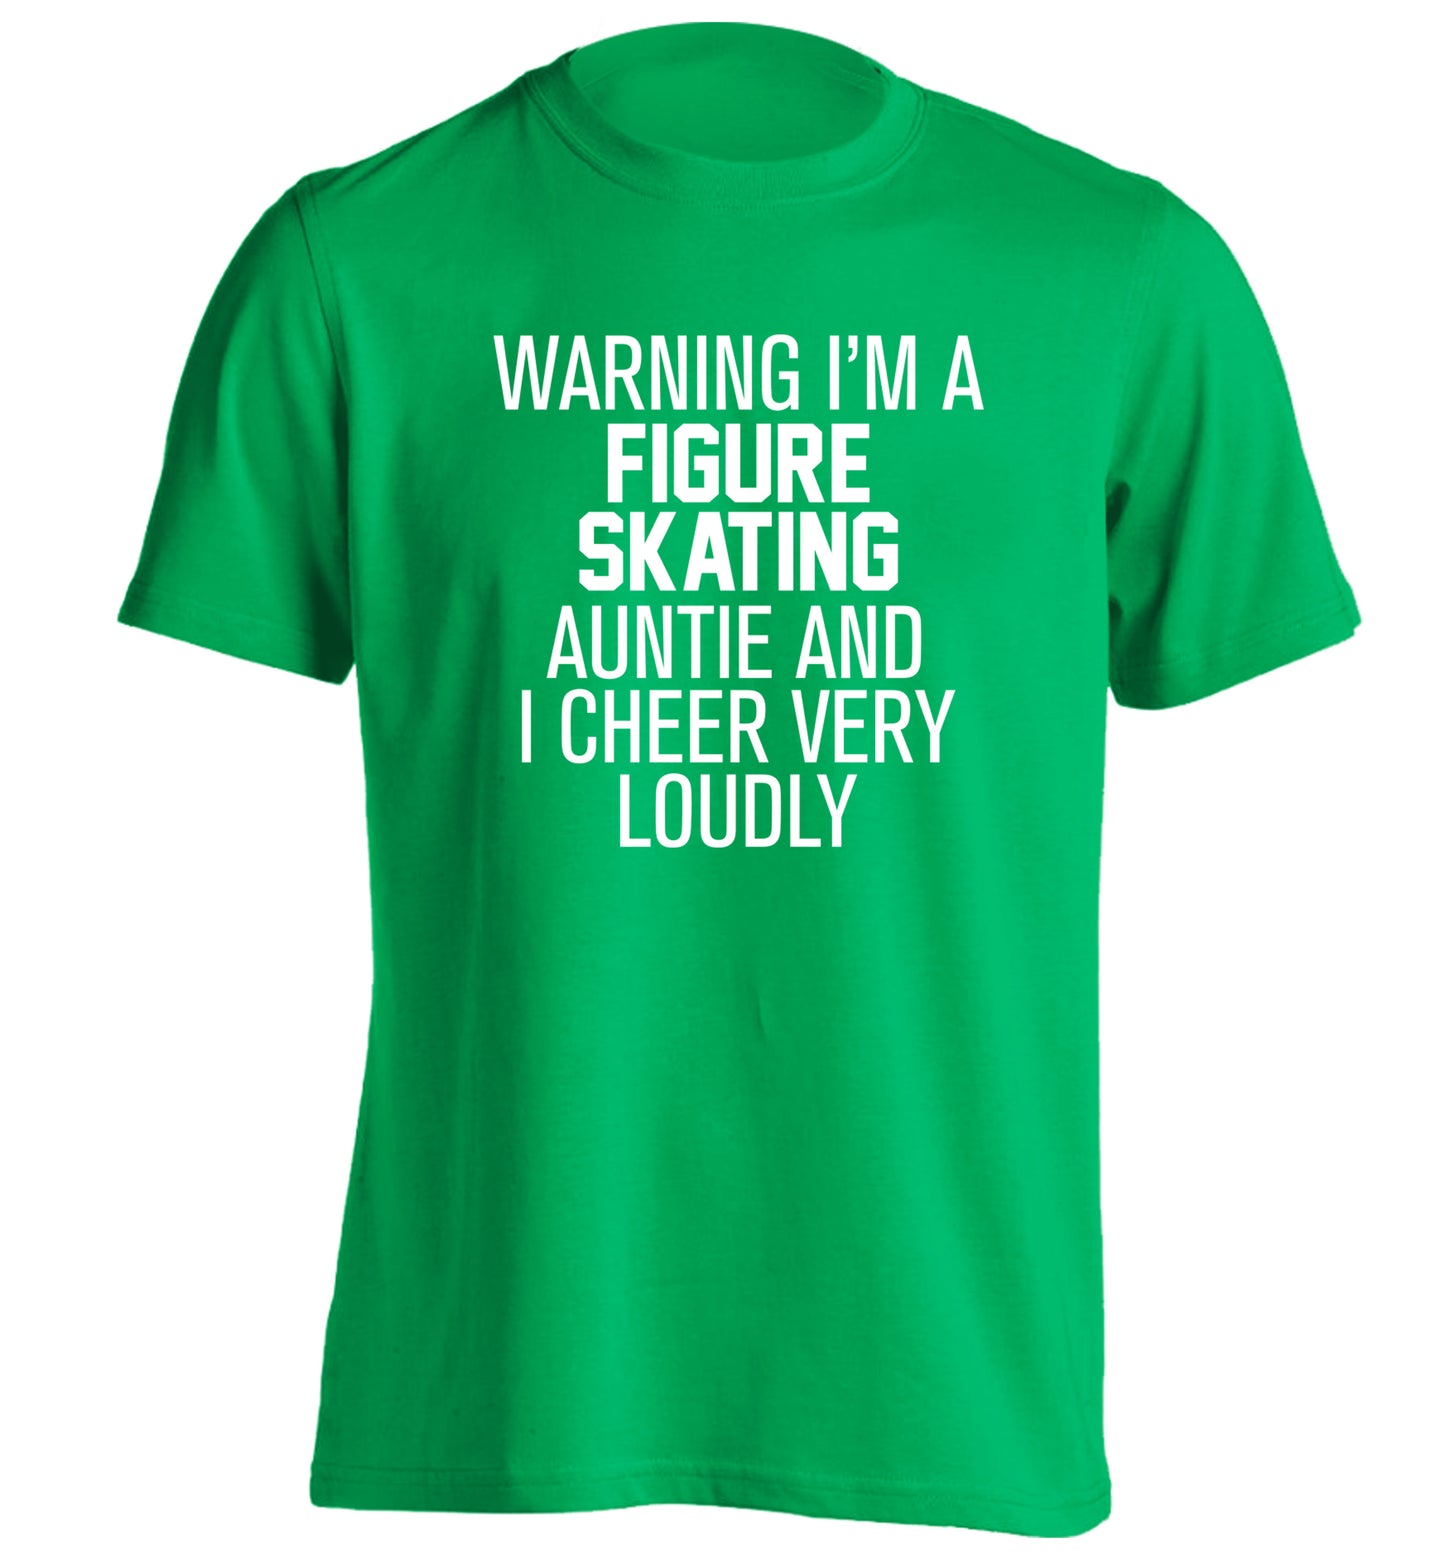 Warning I'm a figure skating auntie and I cheer very loudly adults unisexgreen Tshirt 2XL